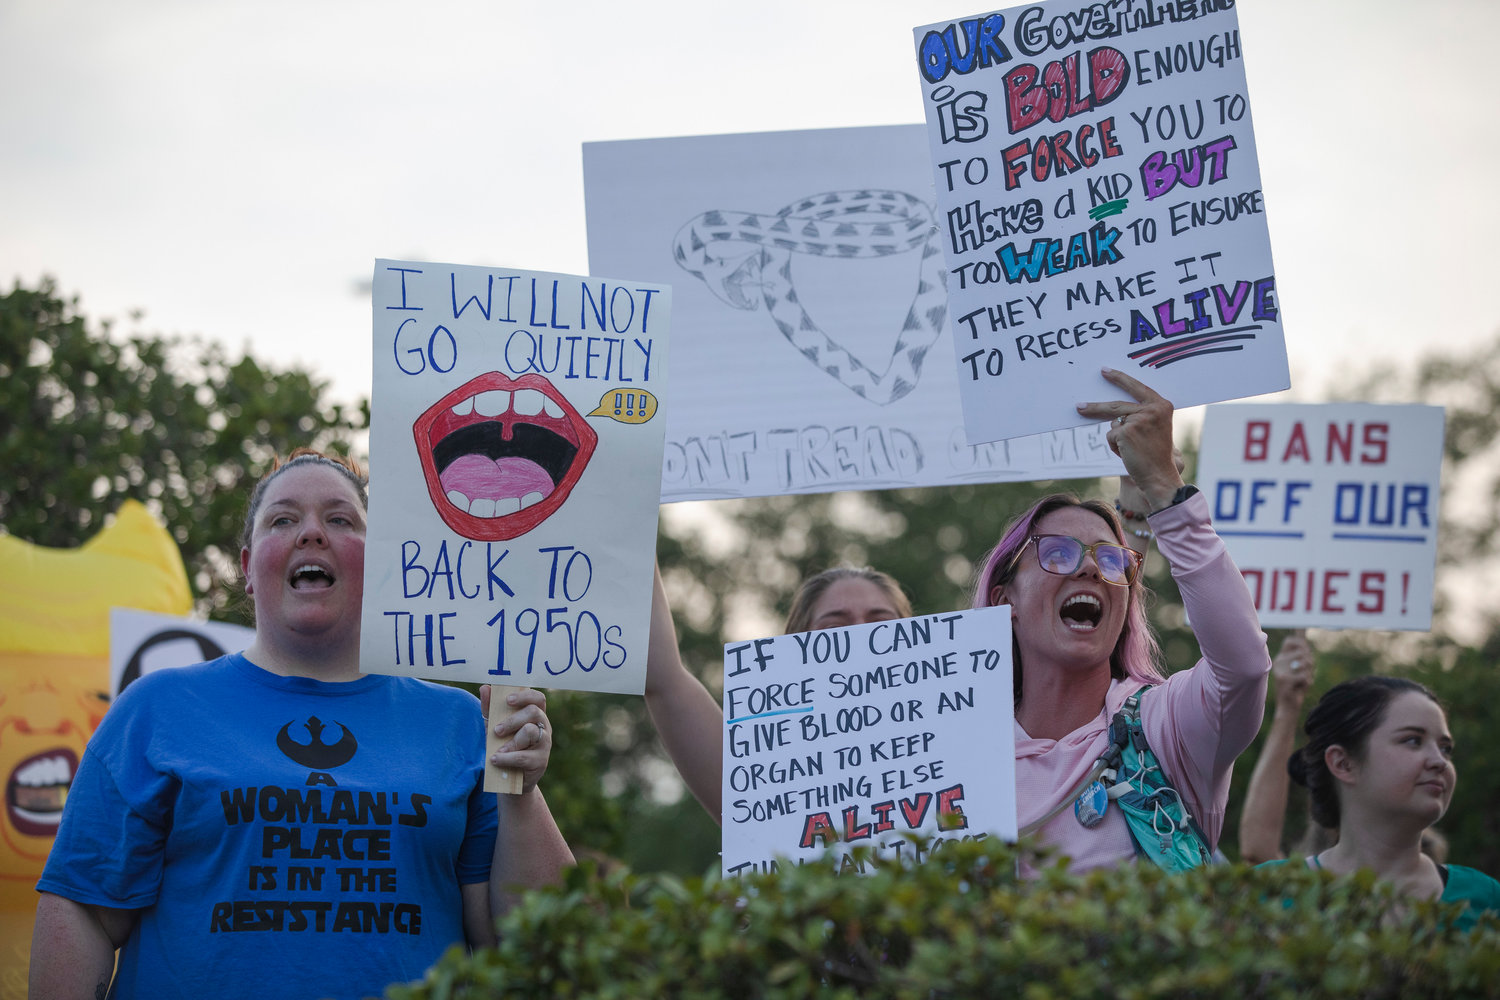 A group of protestors gather outside of the Fairhope Civic Center in opposition to the United States Supreme Court decision to overturn Roe v. Wade.